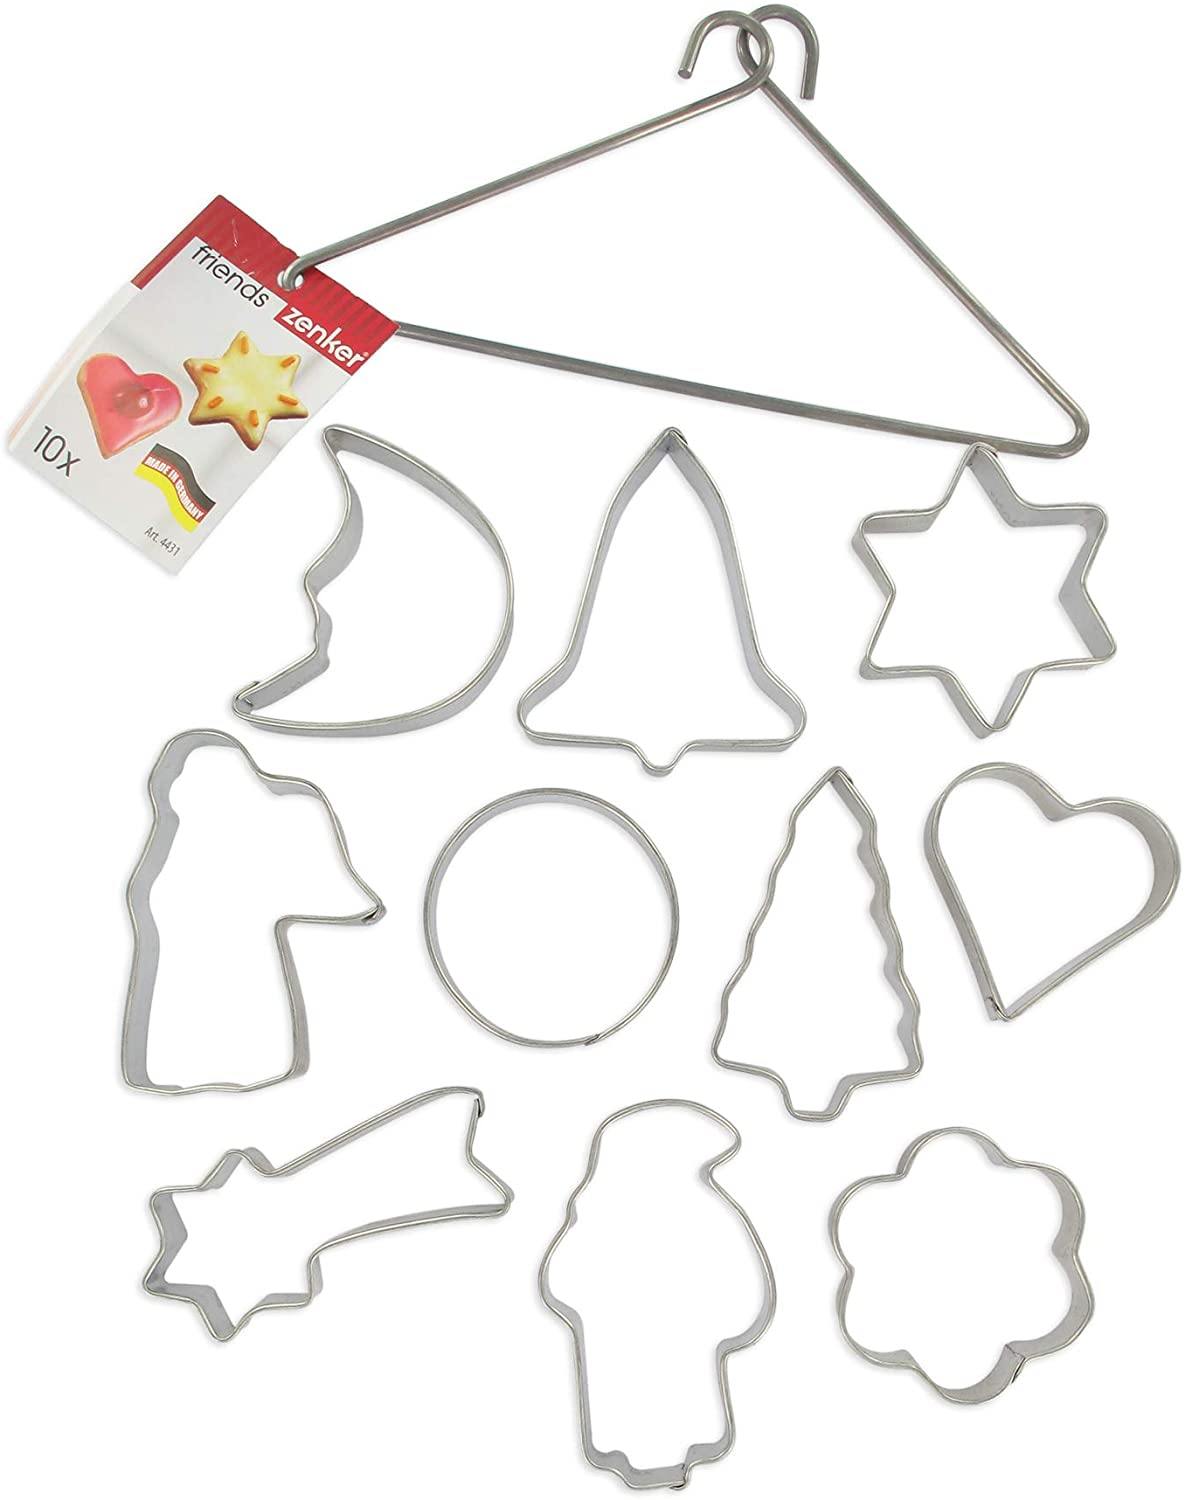 Zenker Cookie Cutter "Patisserie" (Set Of 10), Silver, 3-7X1.7 cm - Whole and All